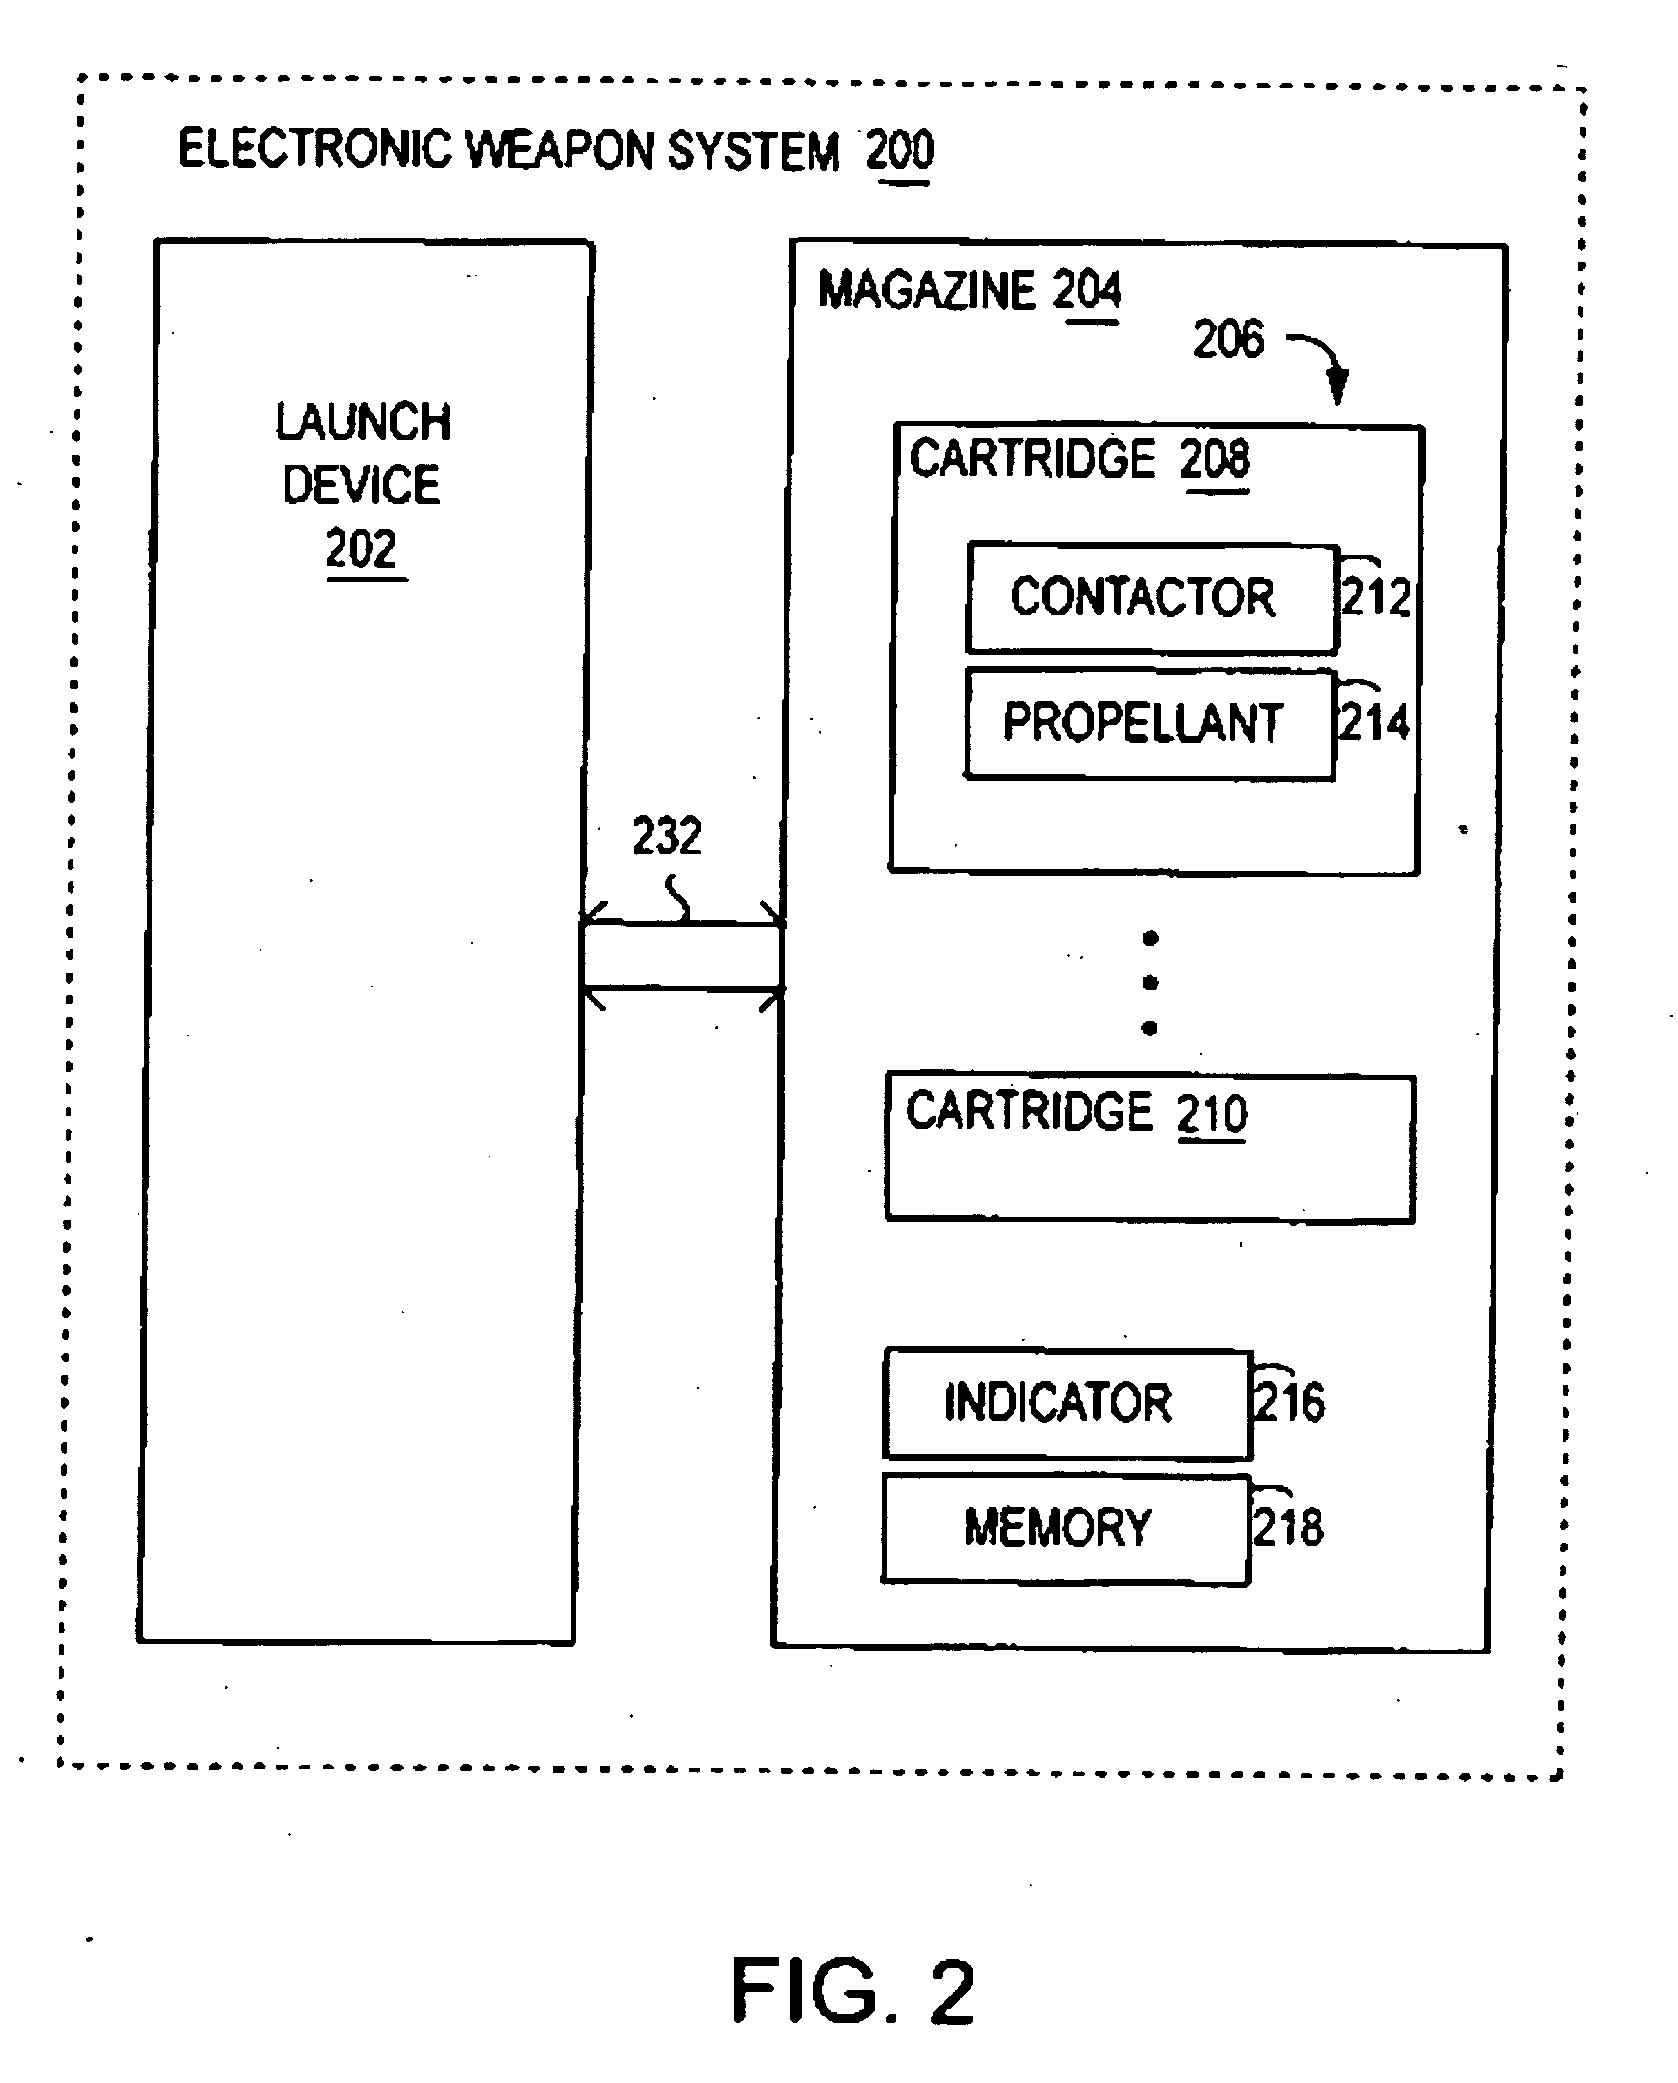 Systems and methods for activating a propellant for an electronic weapon